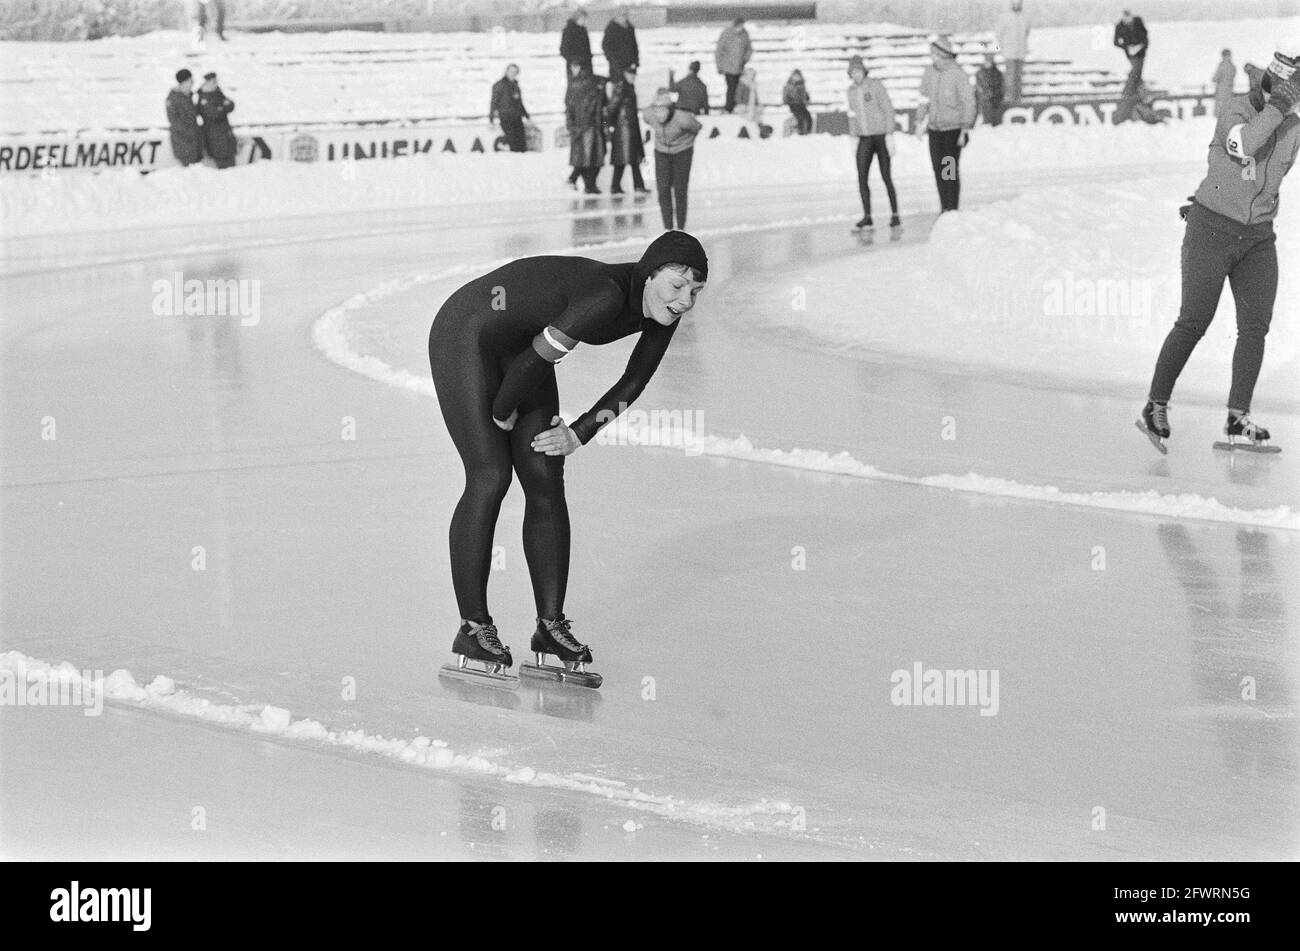 Dutch championships speed skating heerenveen Black and White Stock Photos &  Images - Alamy